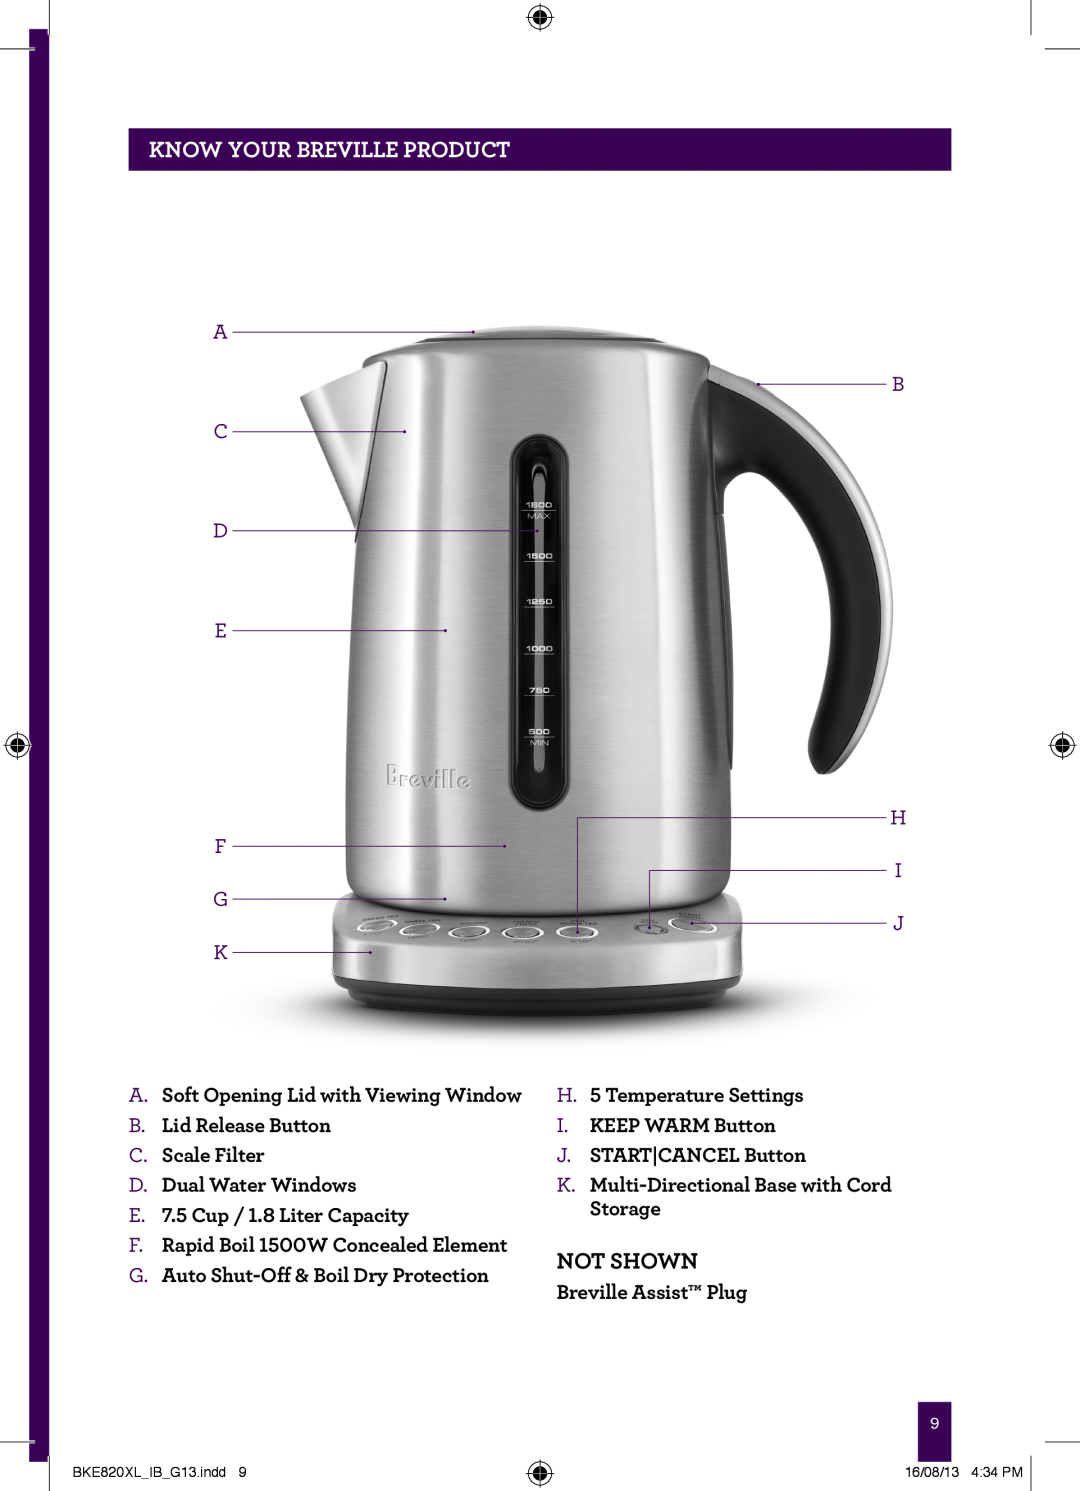 Breville the IQ Kettle, BKE820XL manual PAgeKNOWheaderYOUR BREVILLE..... product, Not Shown, A C D E F G K, B H I J 